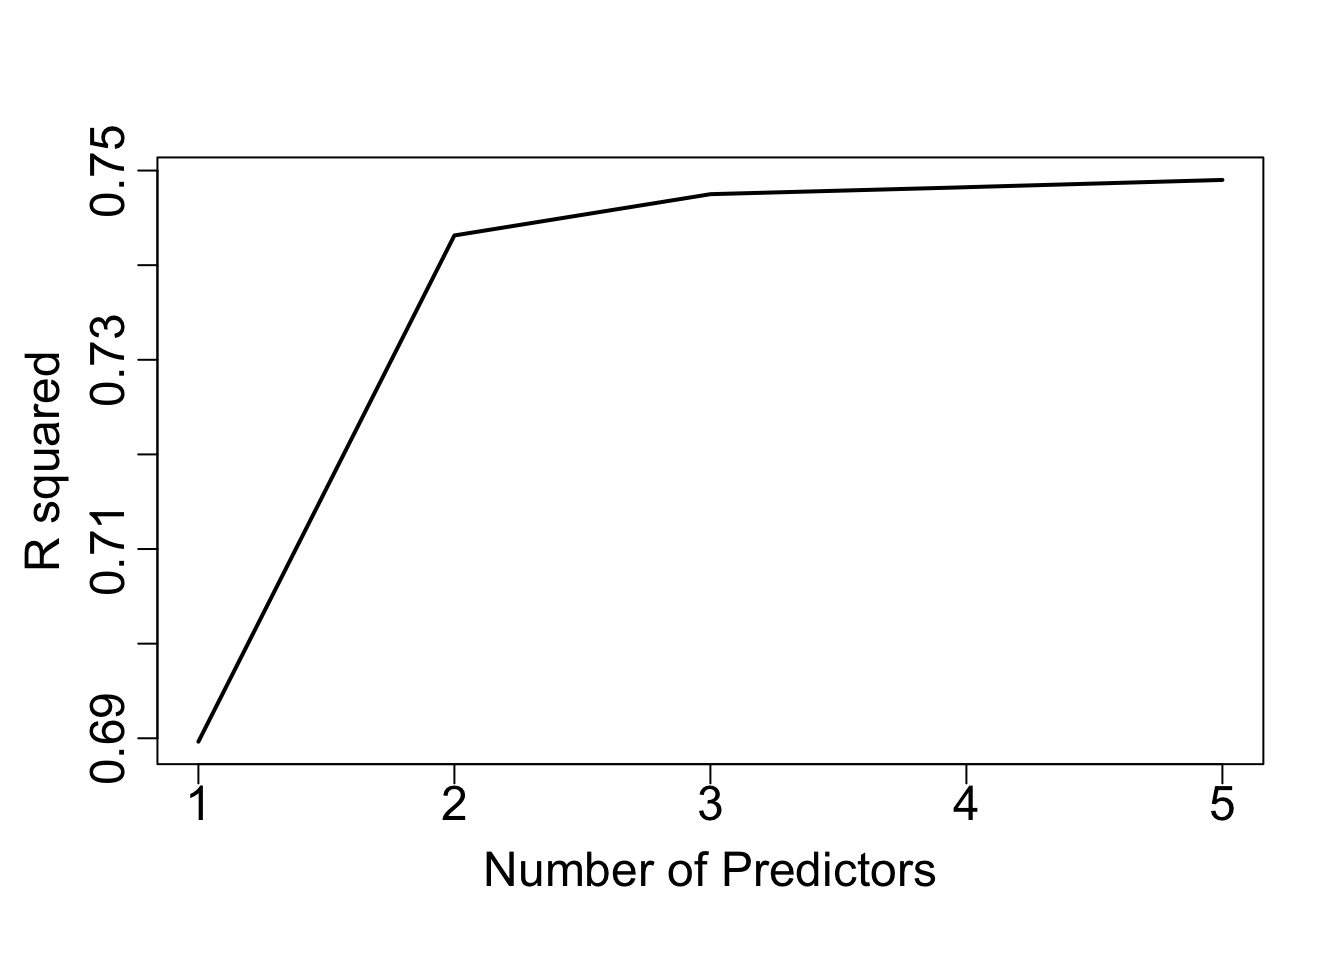 R-squared values against number of predictors for the example discussed in the text.